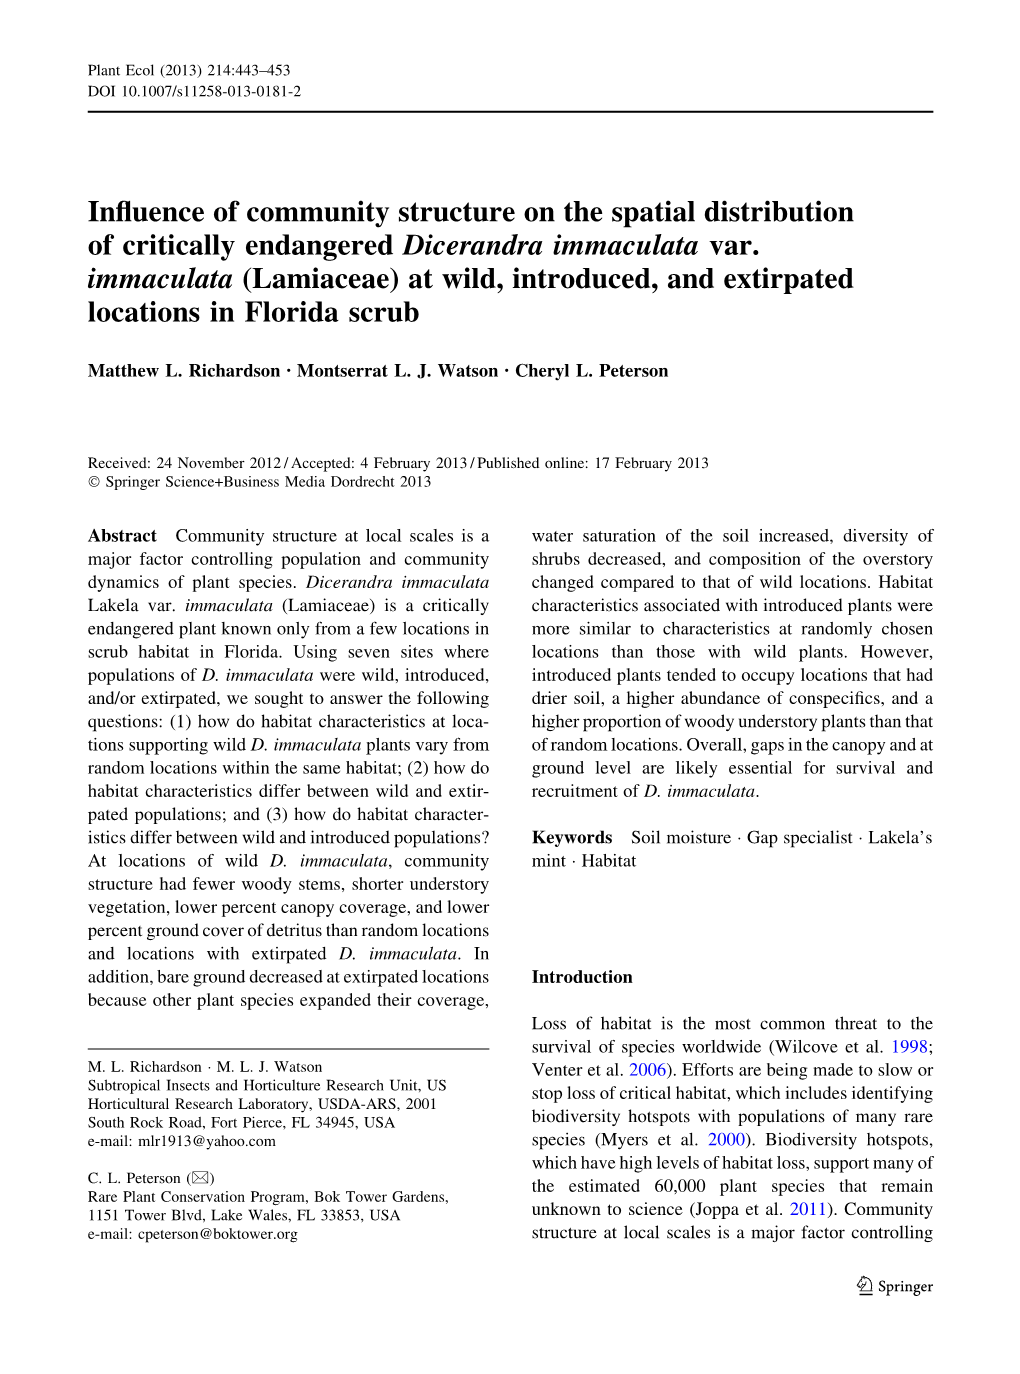 Influence of Community Structure on the Spatial Distribution of Critically